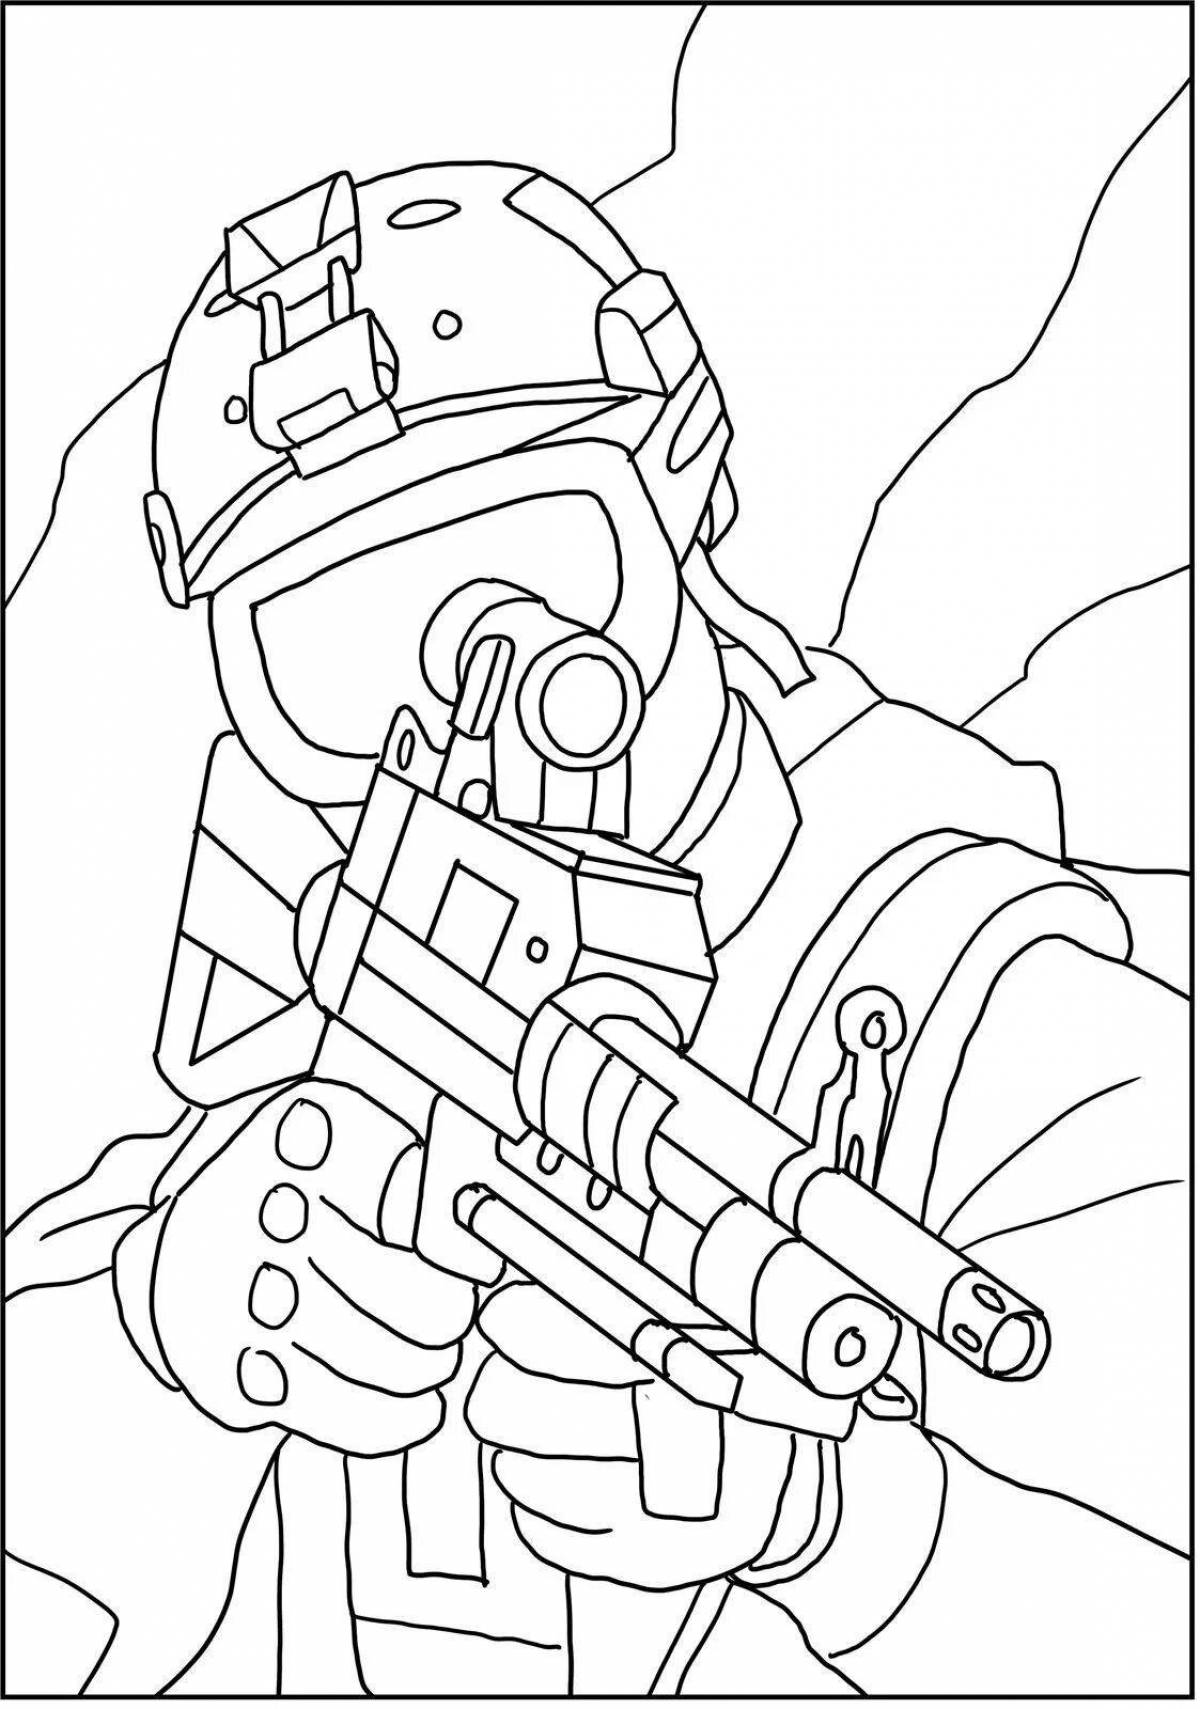 Swat glitter coloring book for boys